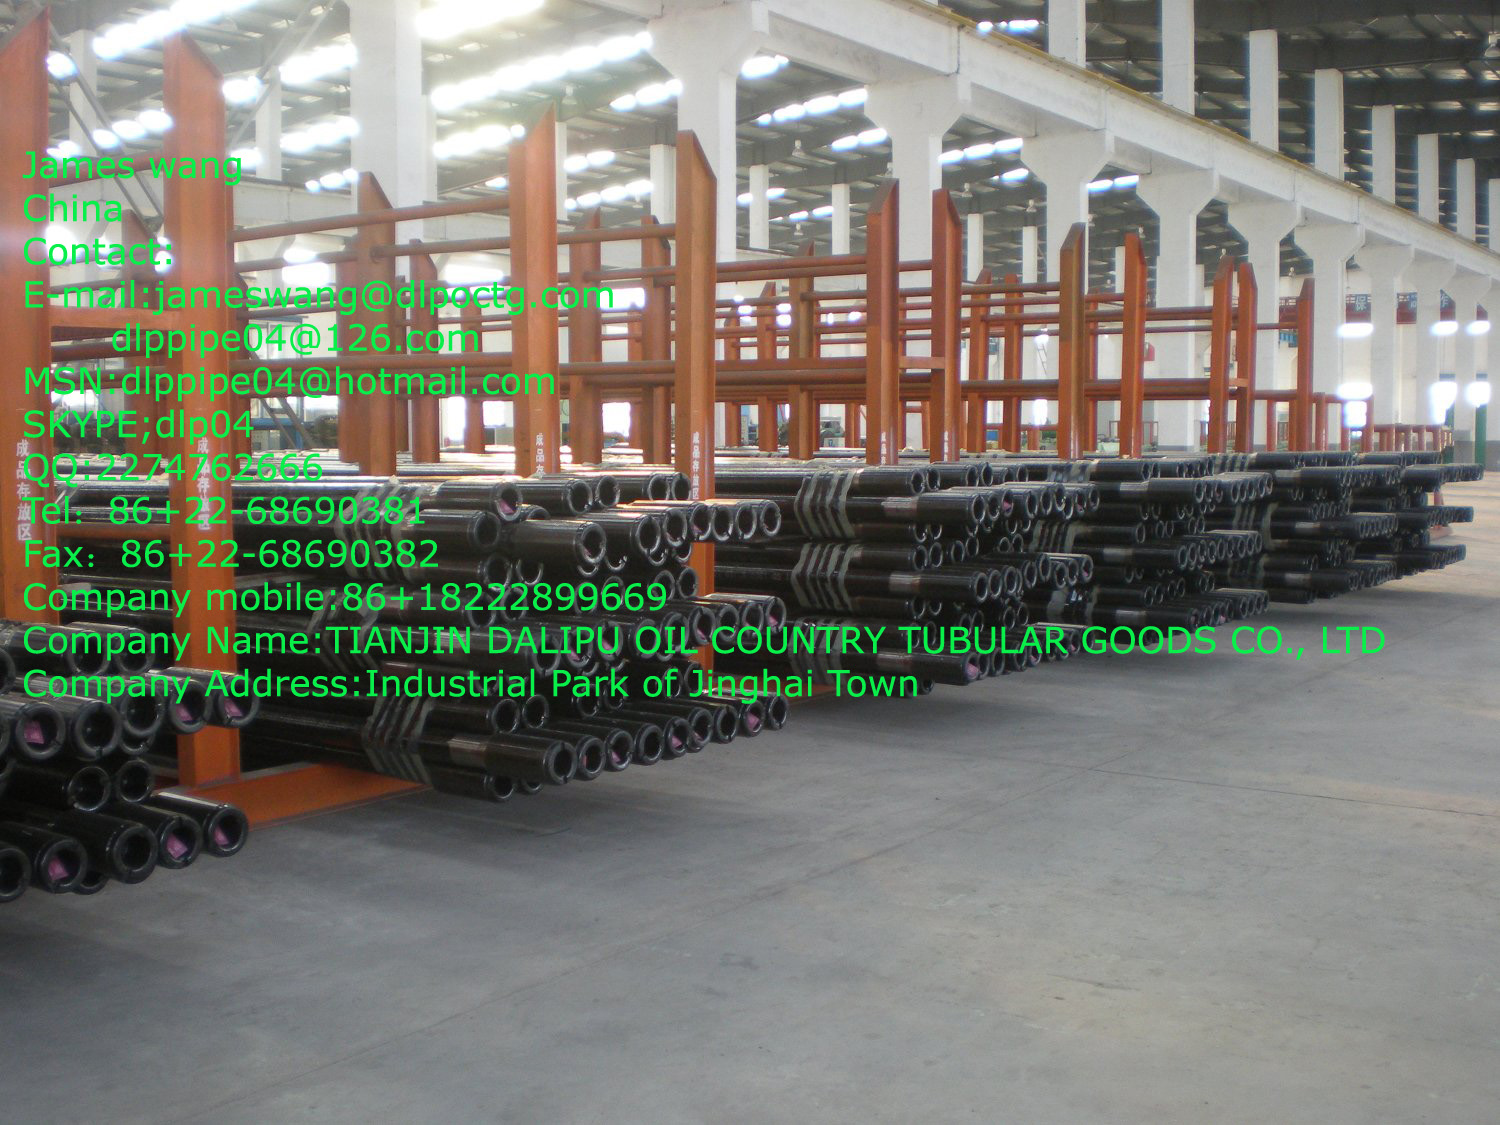 Drill Pipe Od2-7/8 IEU End Grade G105 for Well Drilling